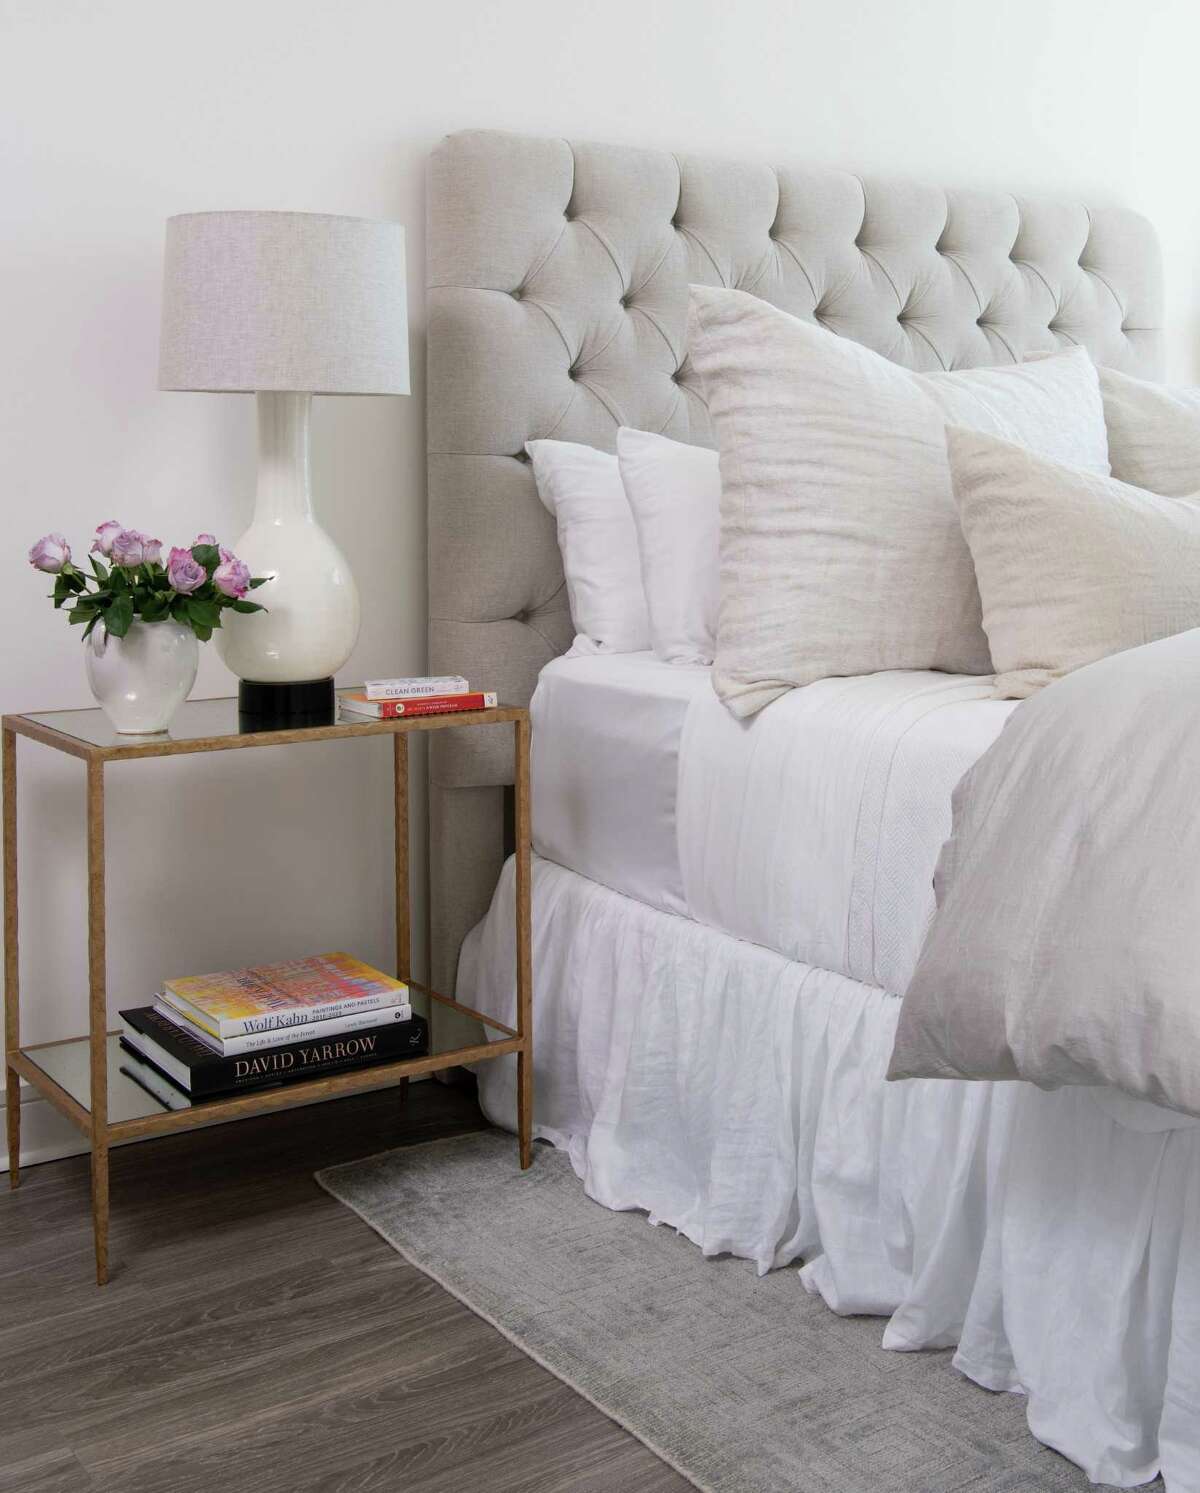 A chenille tufted headboard and soft bedding sets a luxurious tone in the primary bedroom.